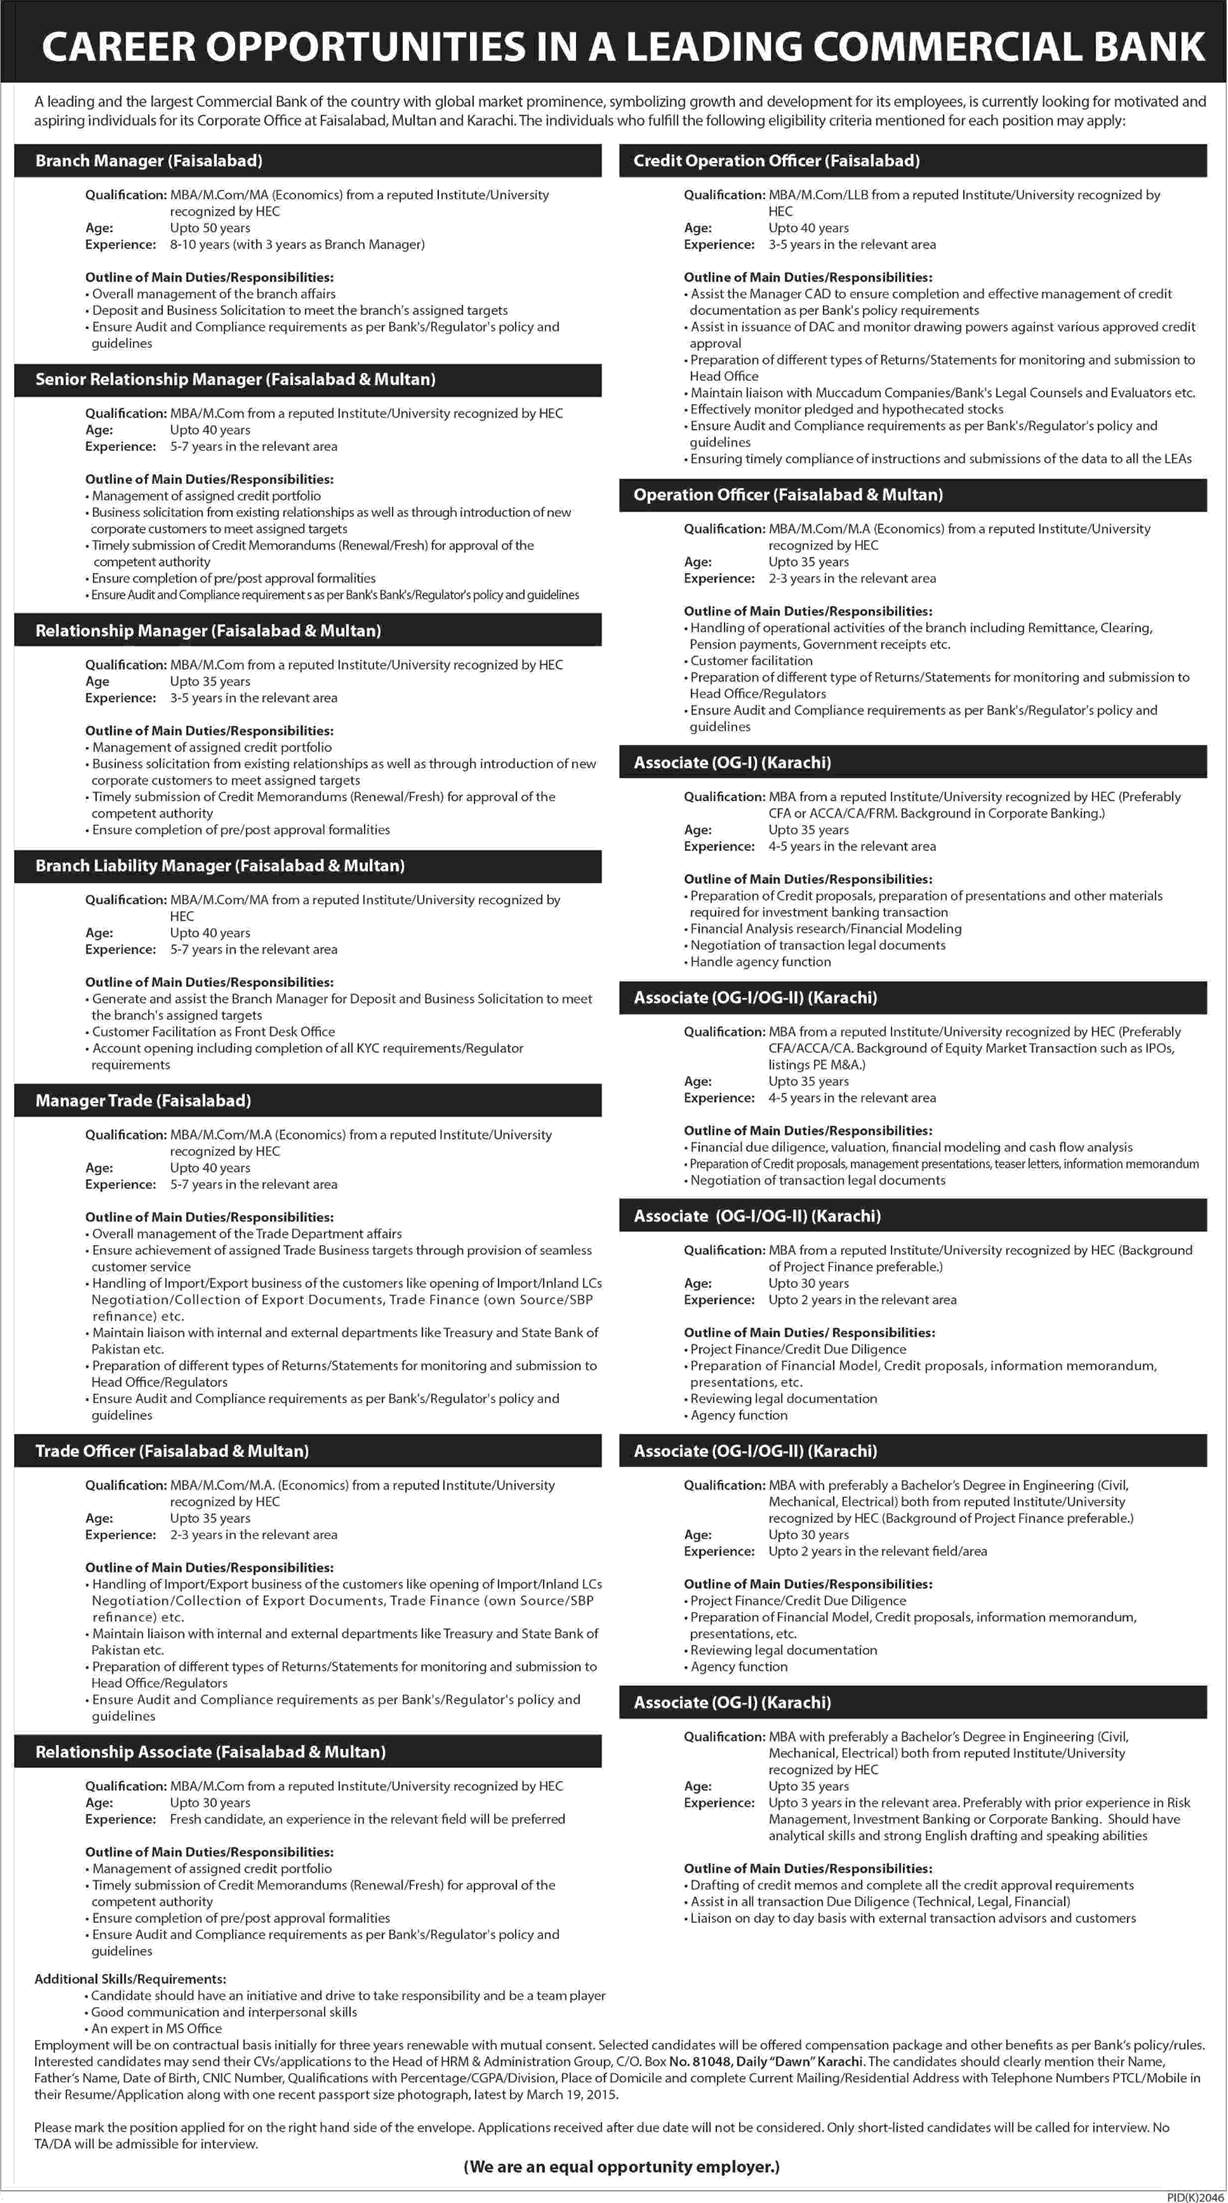 Banking Jobs in Karachi / Faisalabad / Multan 2015 Officers, Managers & Associates in a Commercial Bank